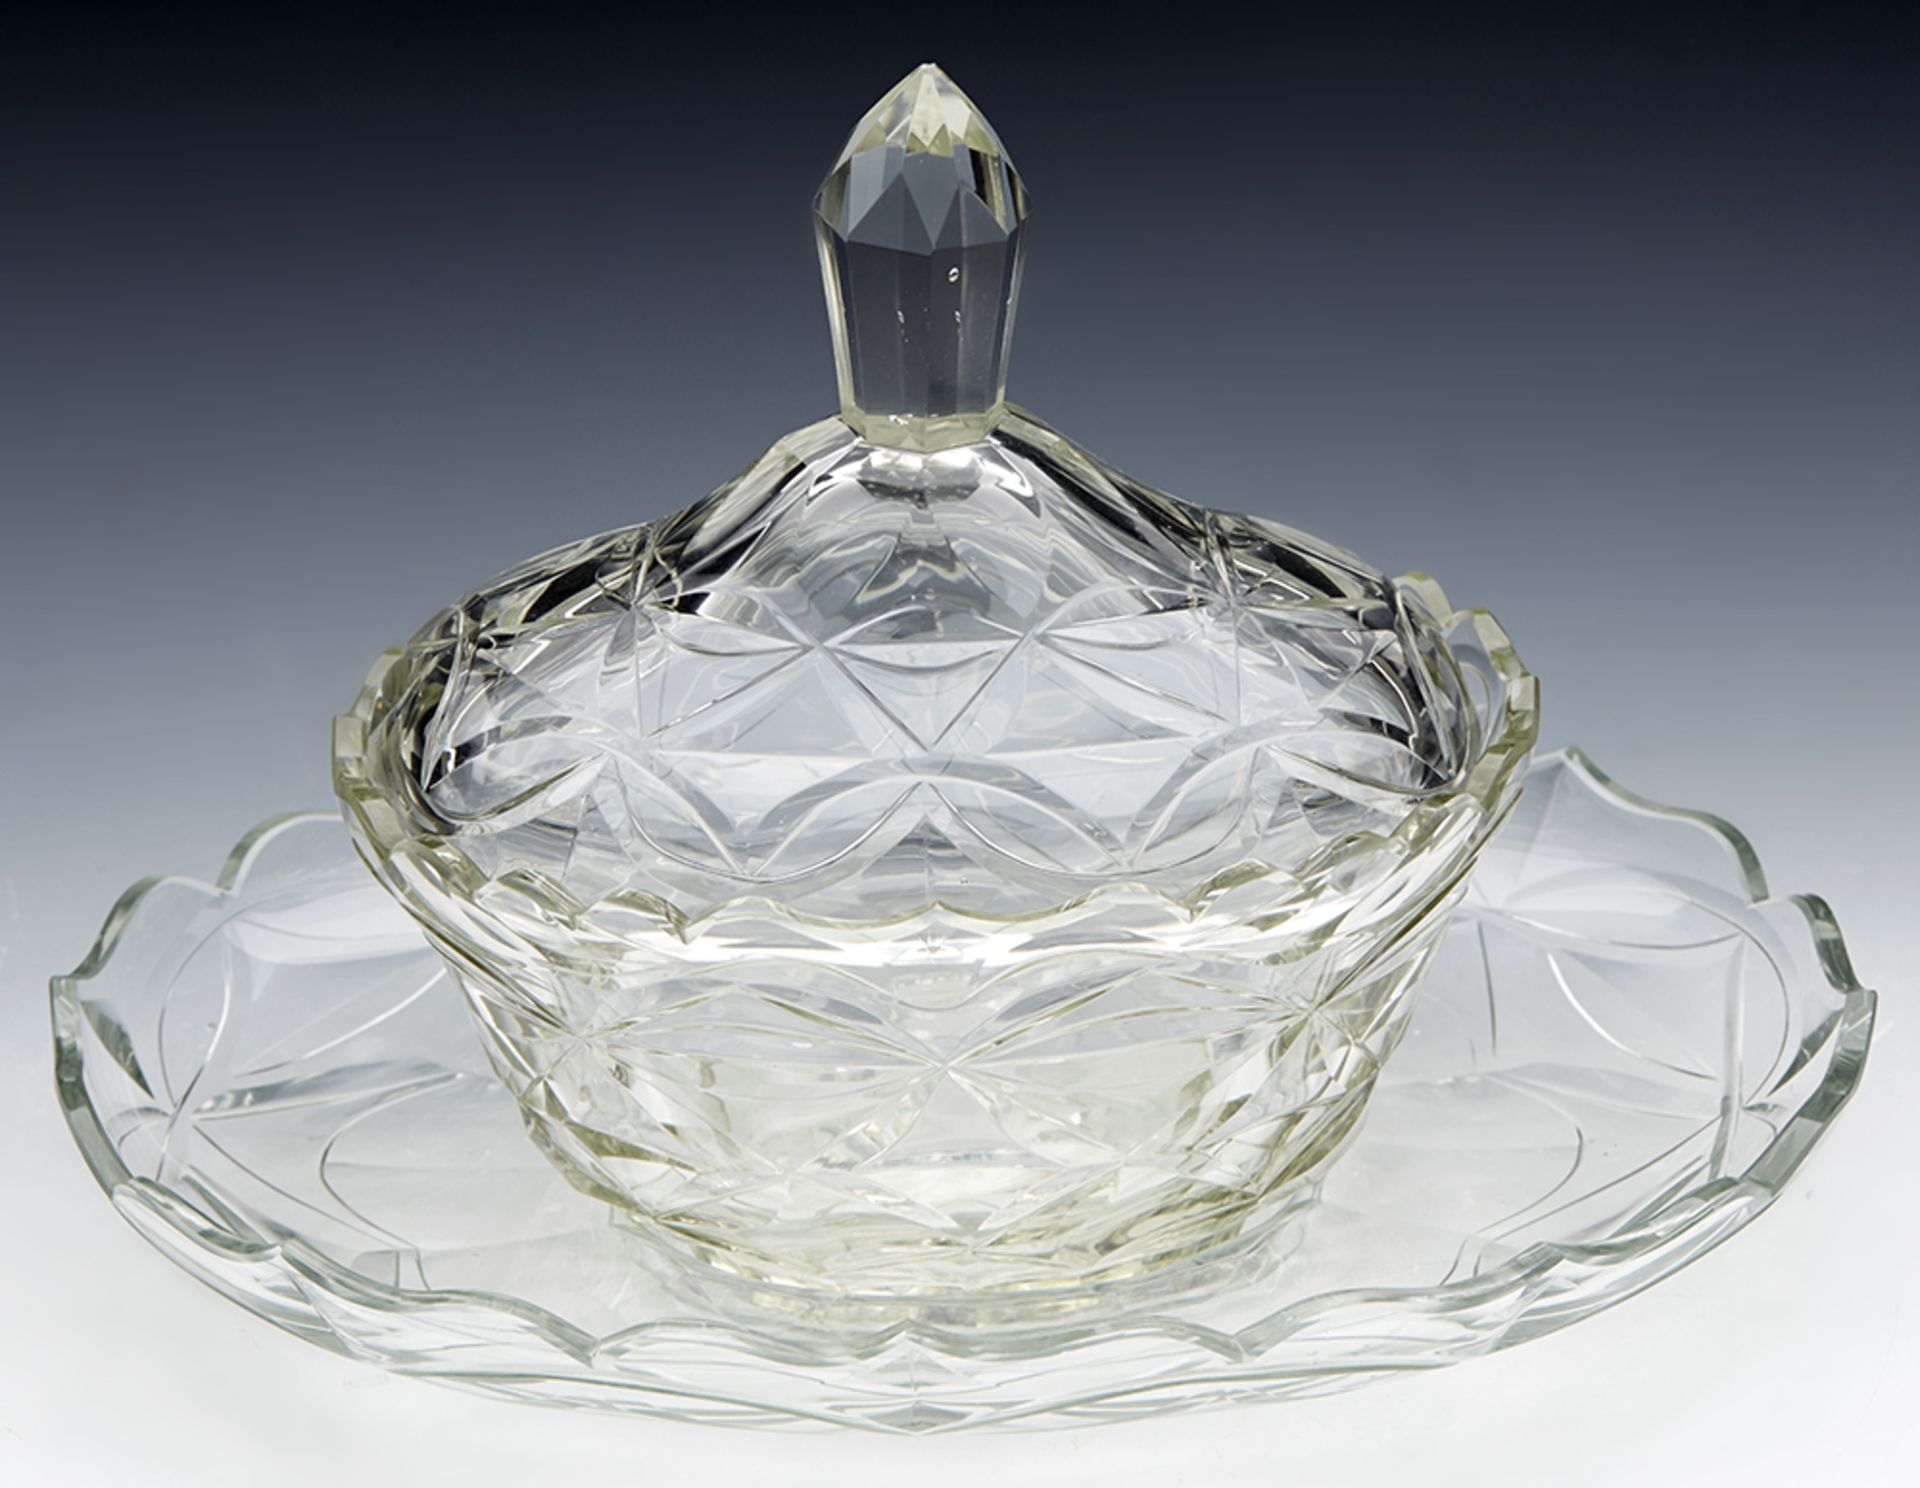 ANTIQUE CUT GLASS LIDDED BUTTER DISH AND STAND EARLY 19TH C.   DIMENSIONS   Height 19cm, Length 25,